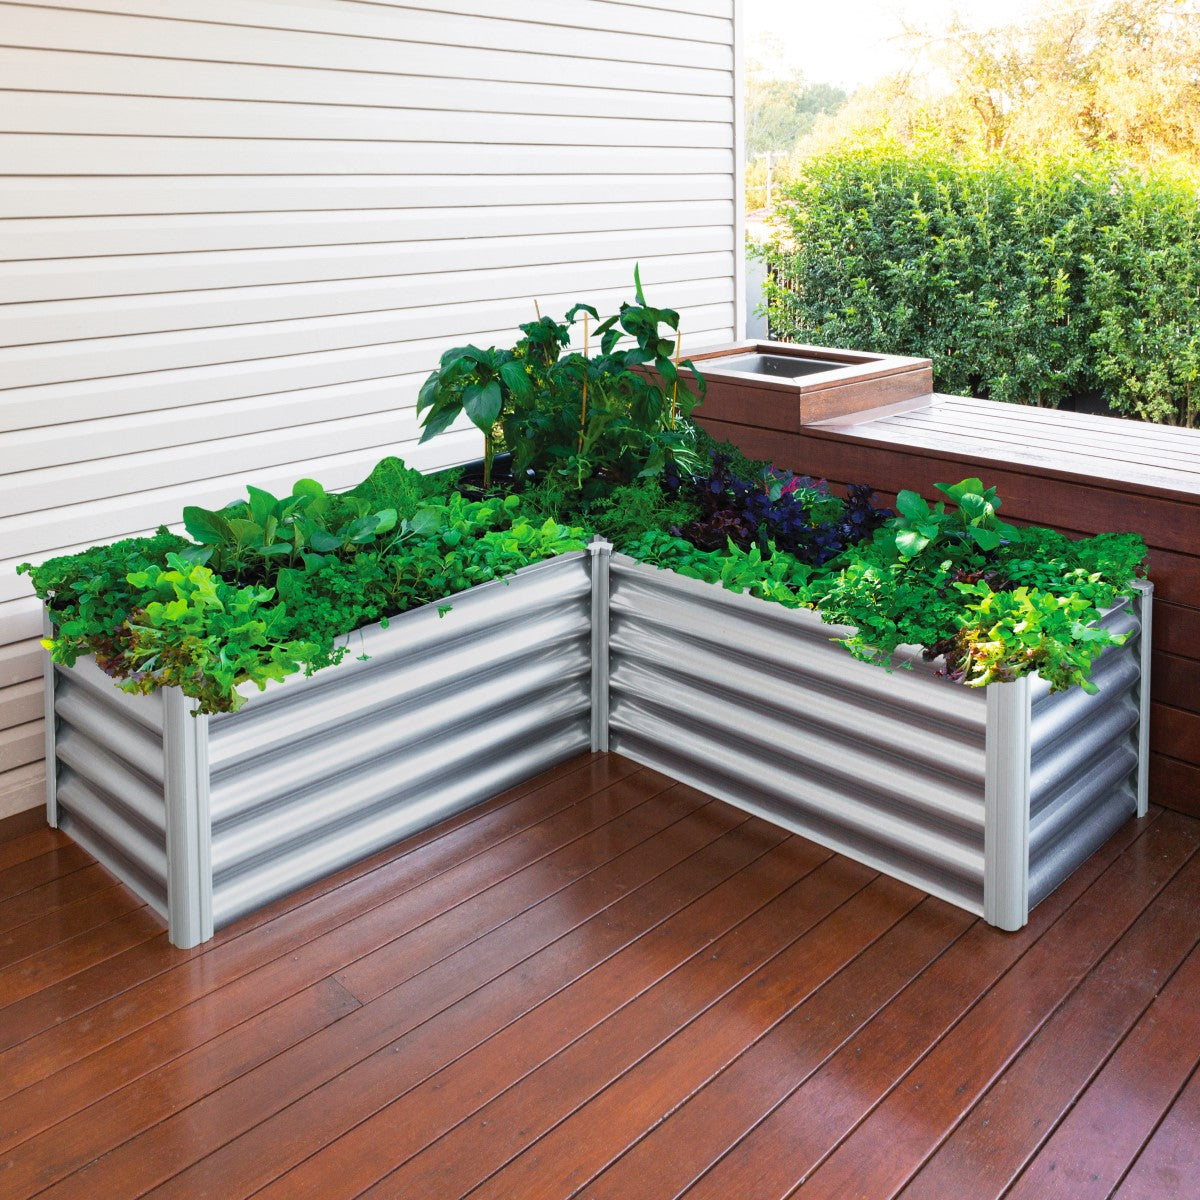 Absco | 5x5x1.3 ft L Shaped Raised Garden Bed - Woodland Gray